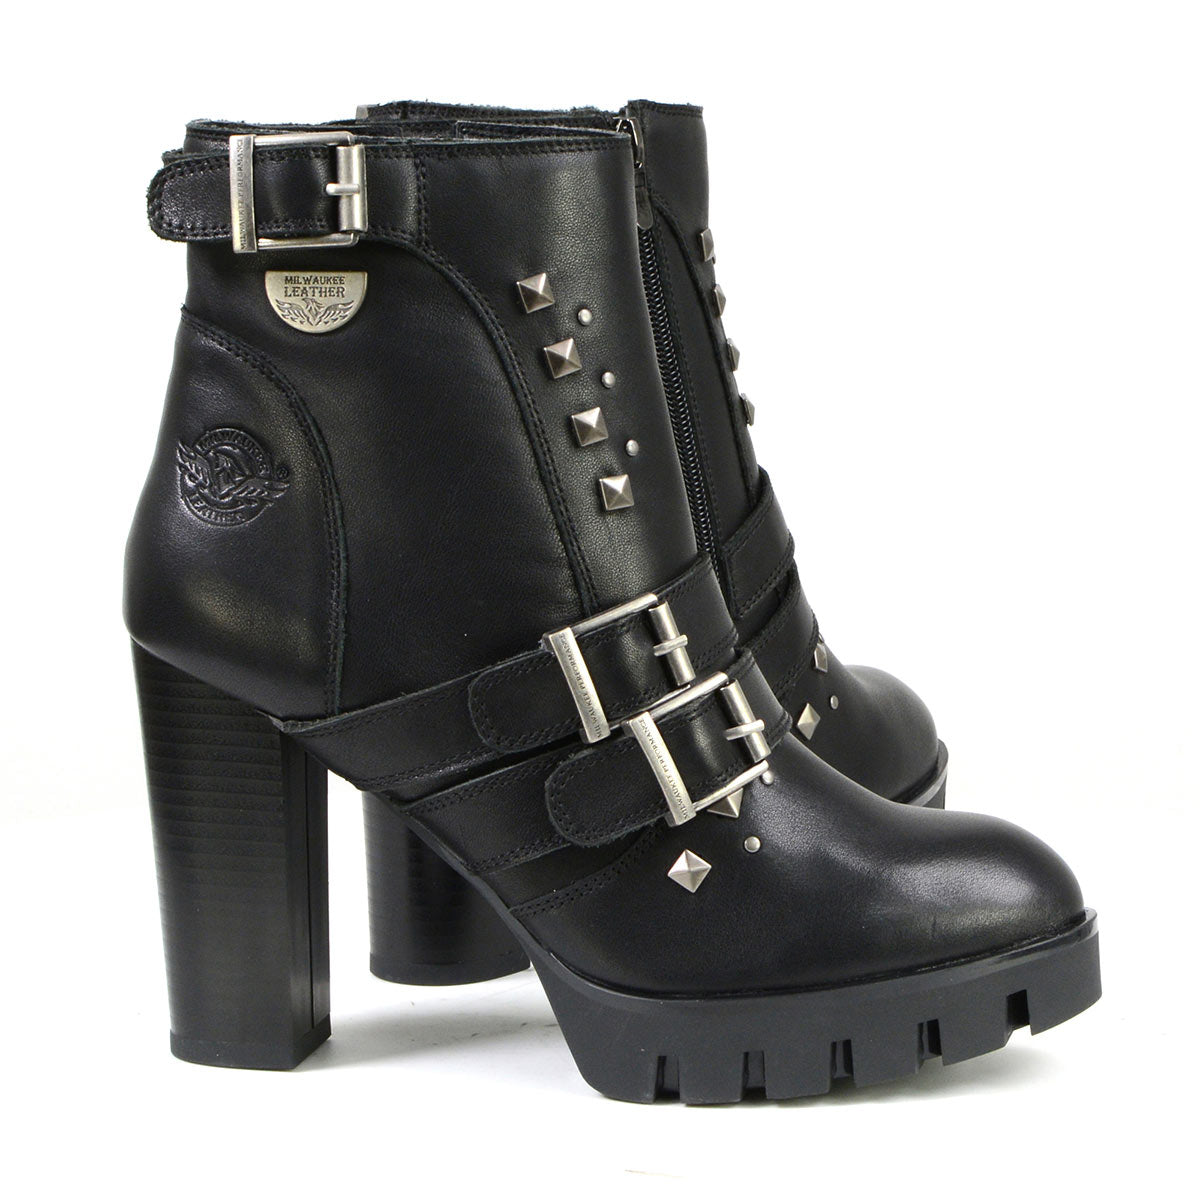 Milwaukee Leather MBL9456 Women's Black Leather Platform Boots with Straps